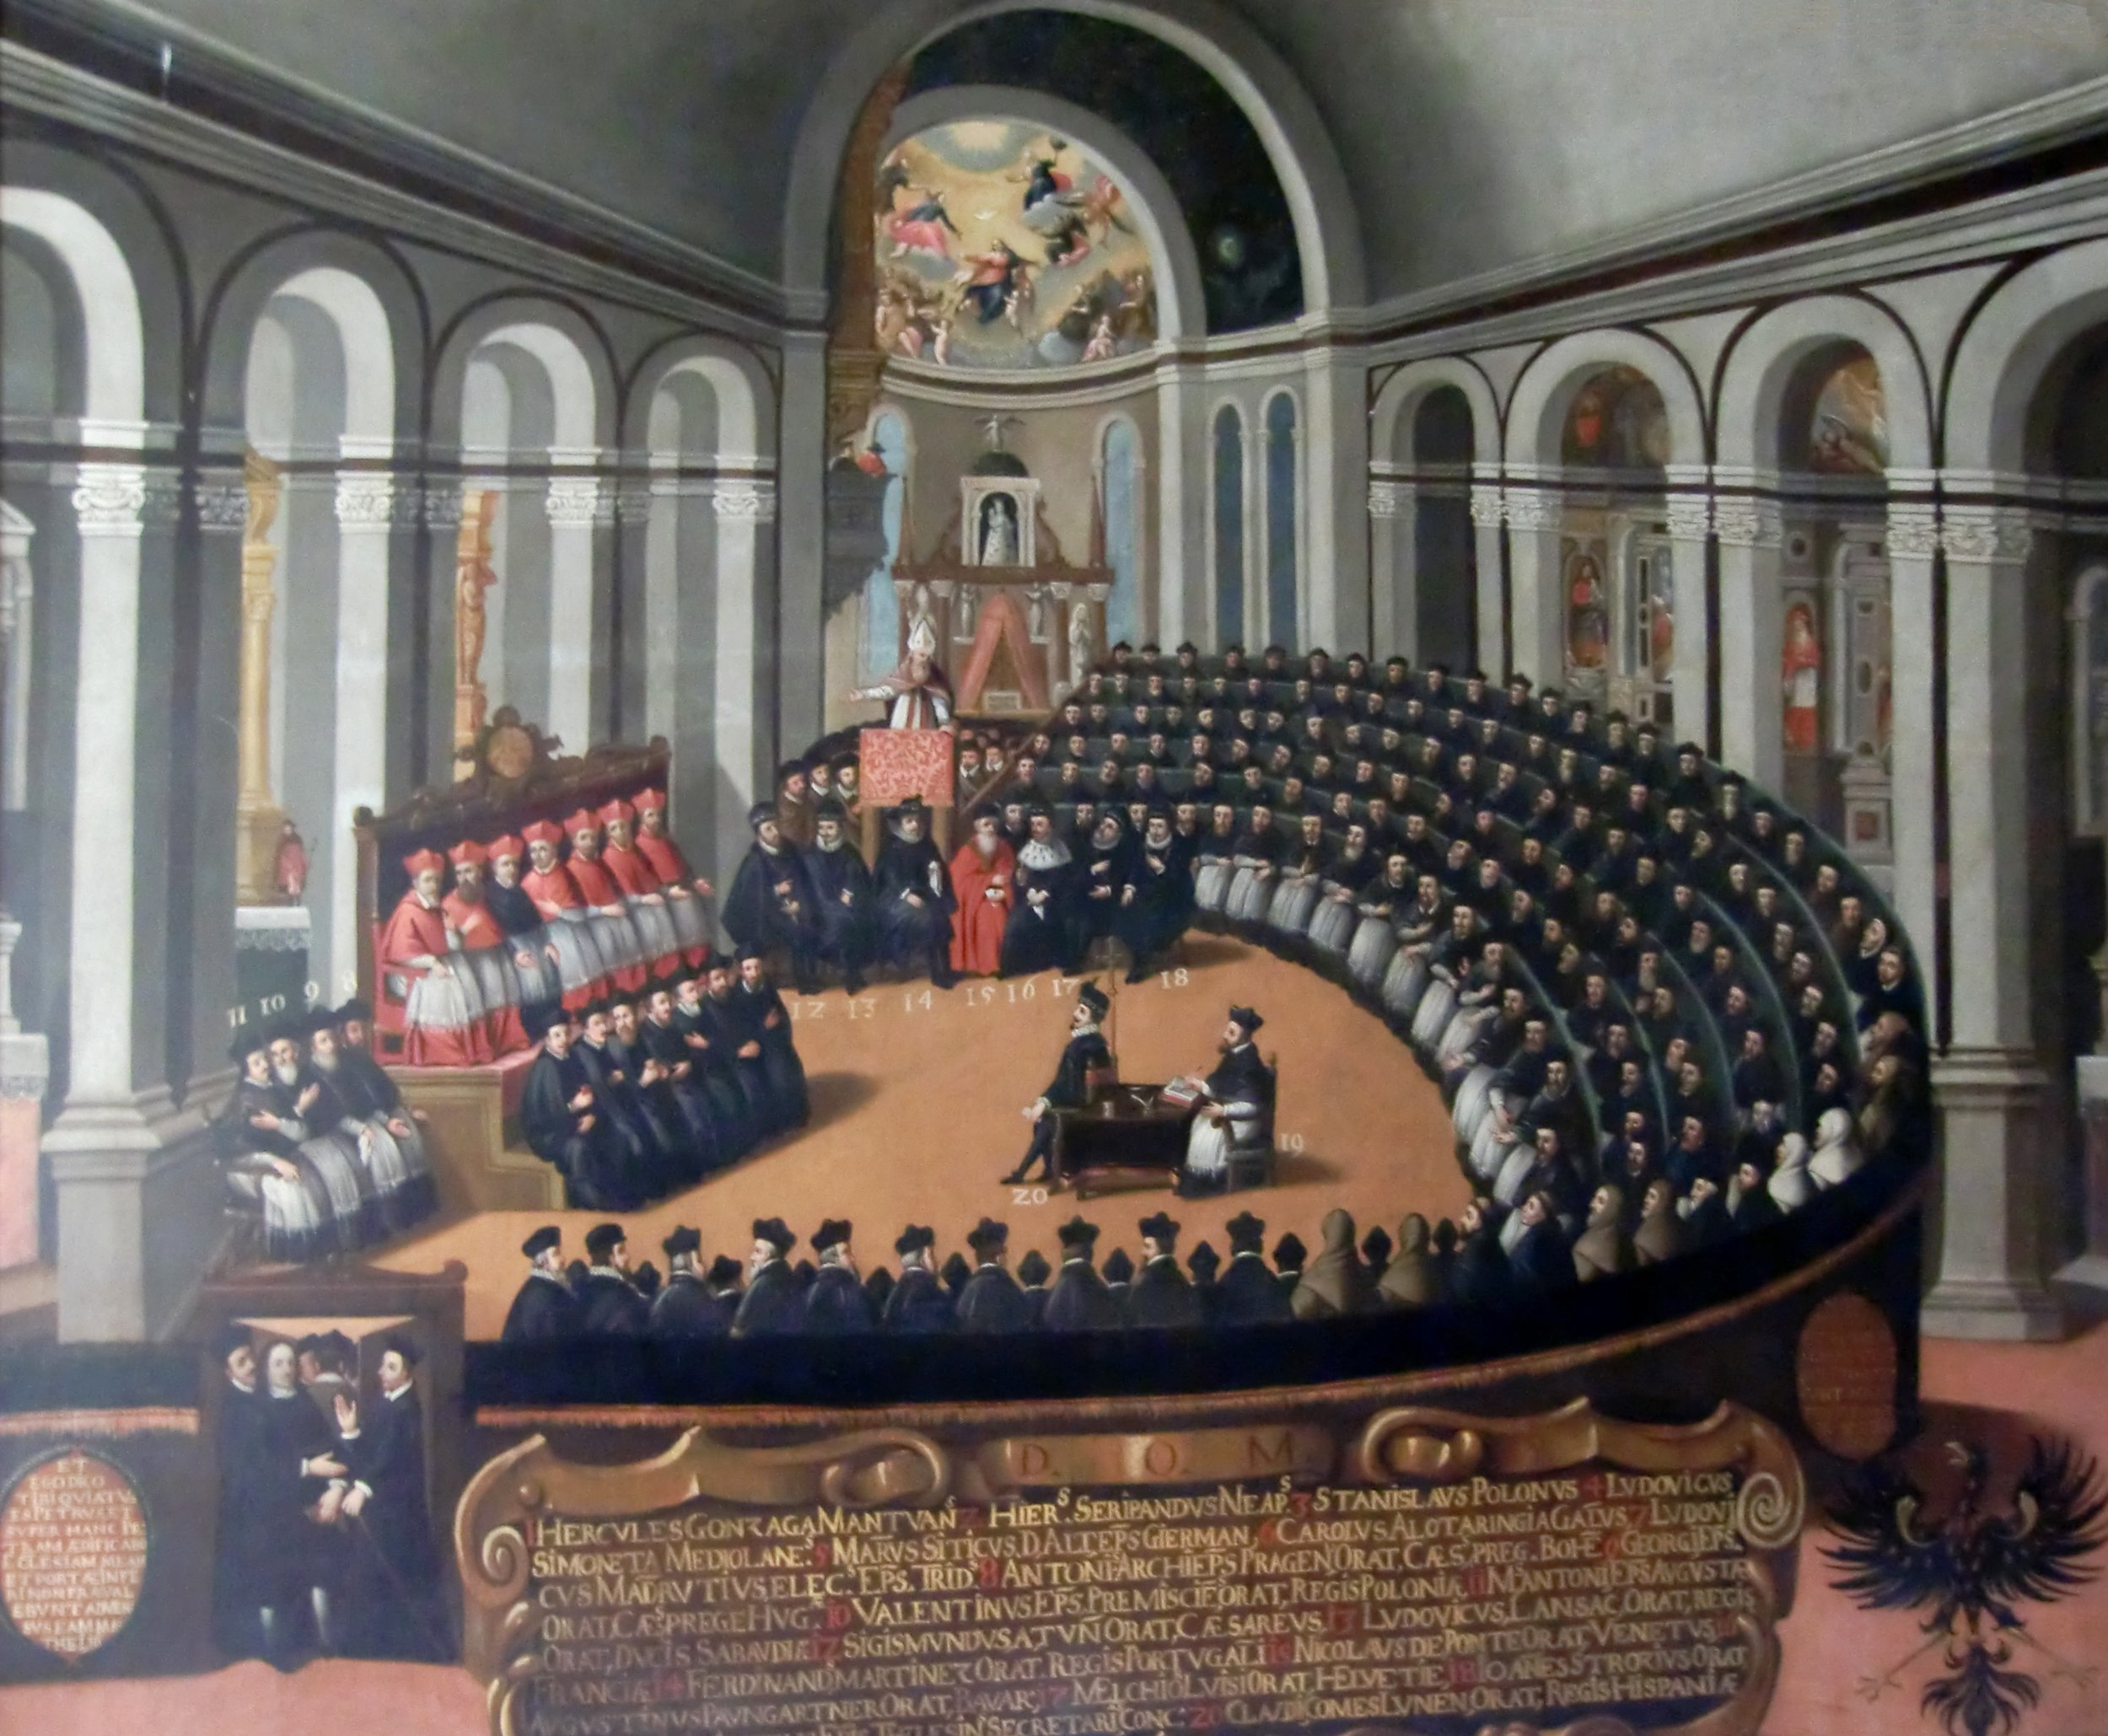 Council of Trent, painting in the Museo del Palazzo del Buonconsiglio, TrentoBy Laurom - Own work, CC BY-SA 3.0, https://commons.wikimedia.org/w/index.php?curid=8465486